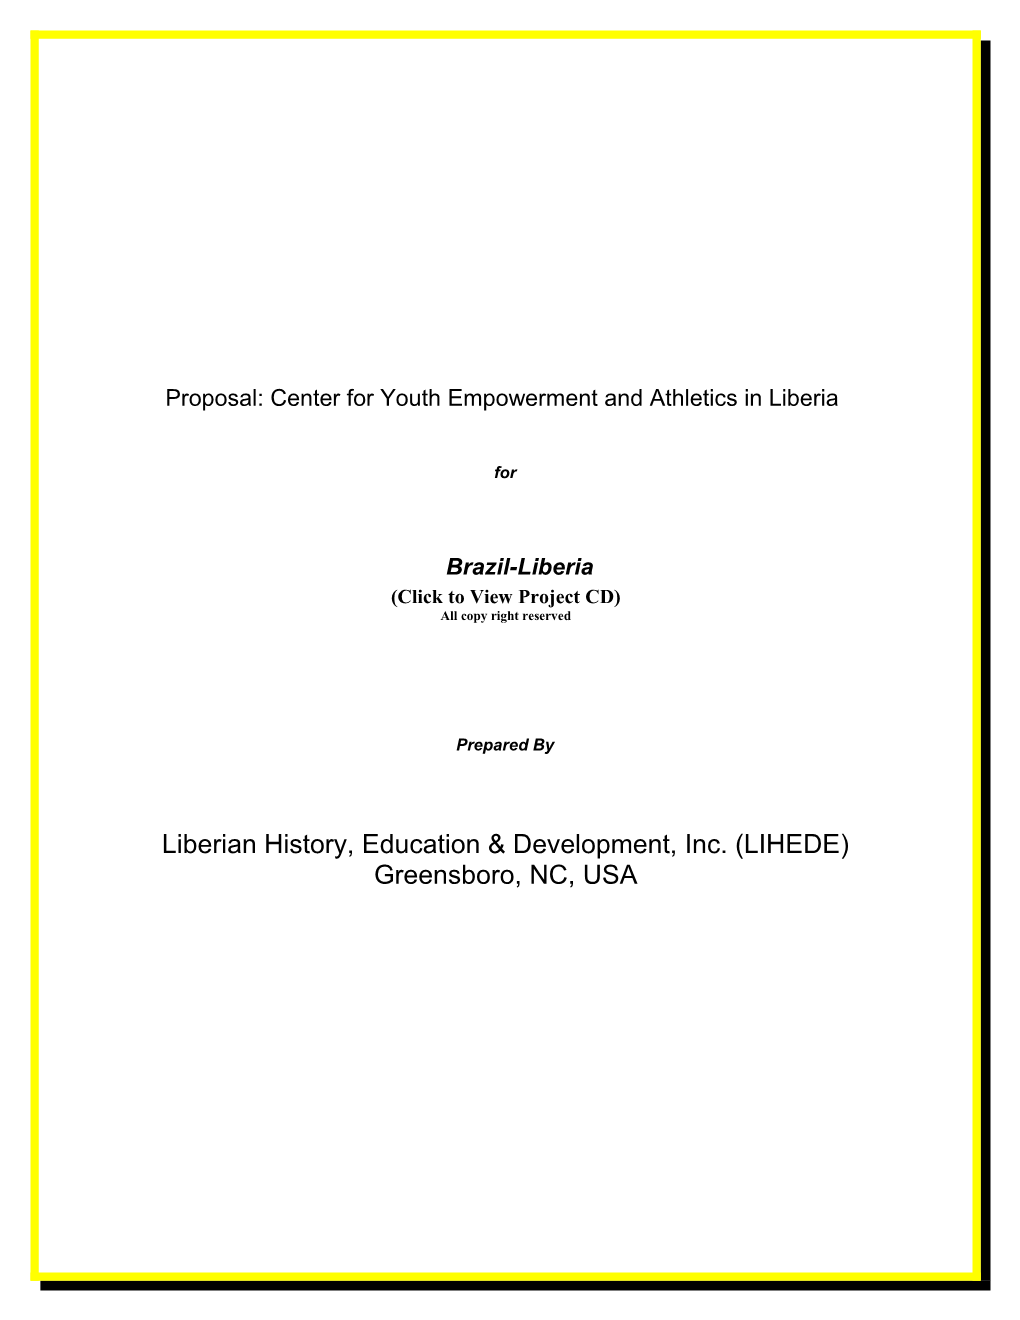 Proposal: Center for Youth Empowerment and Athletics in Liberia